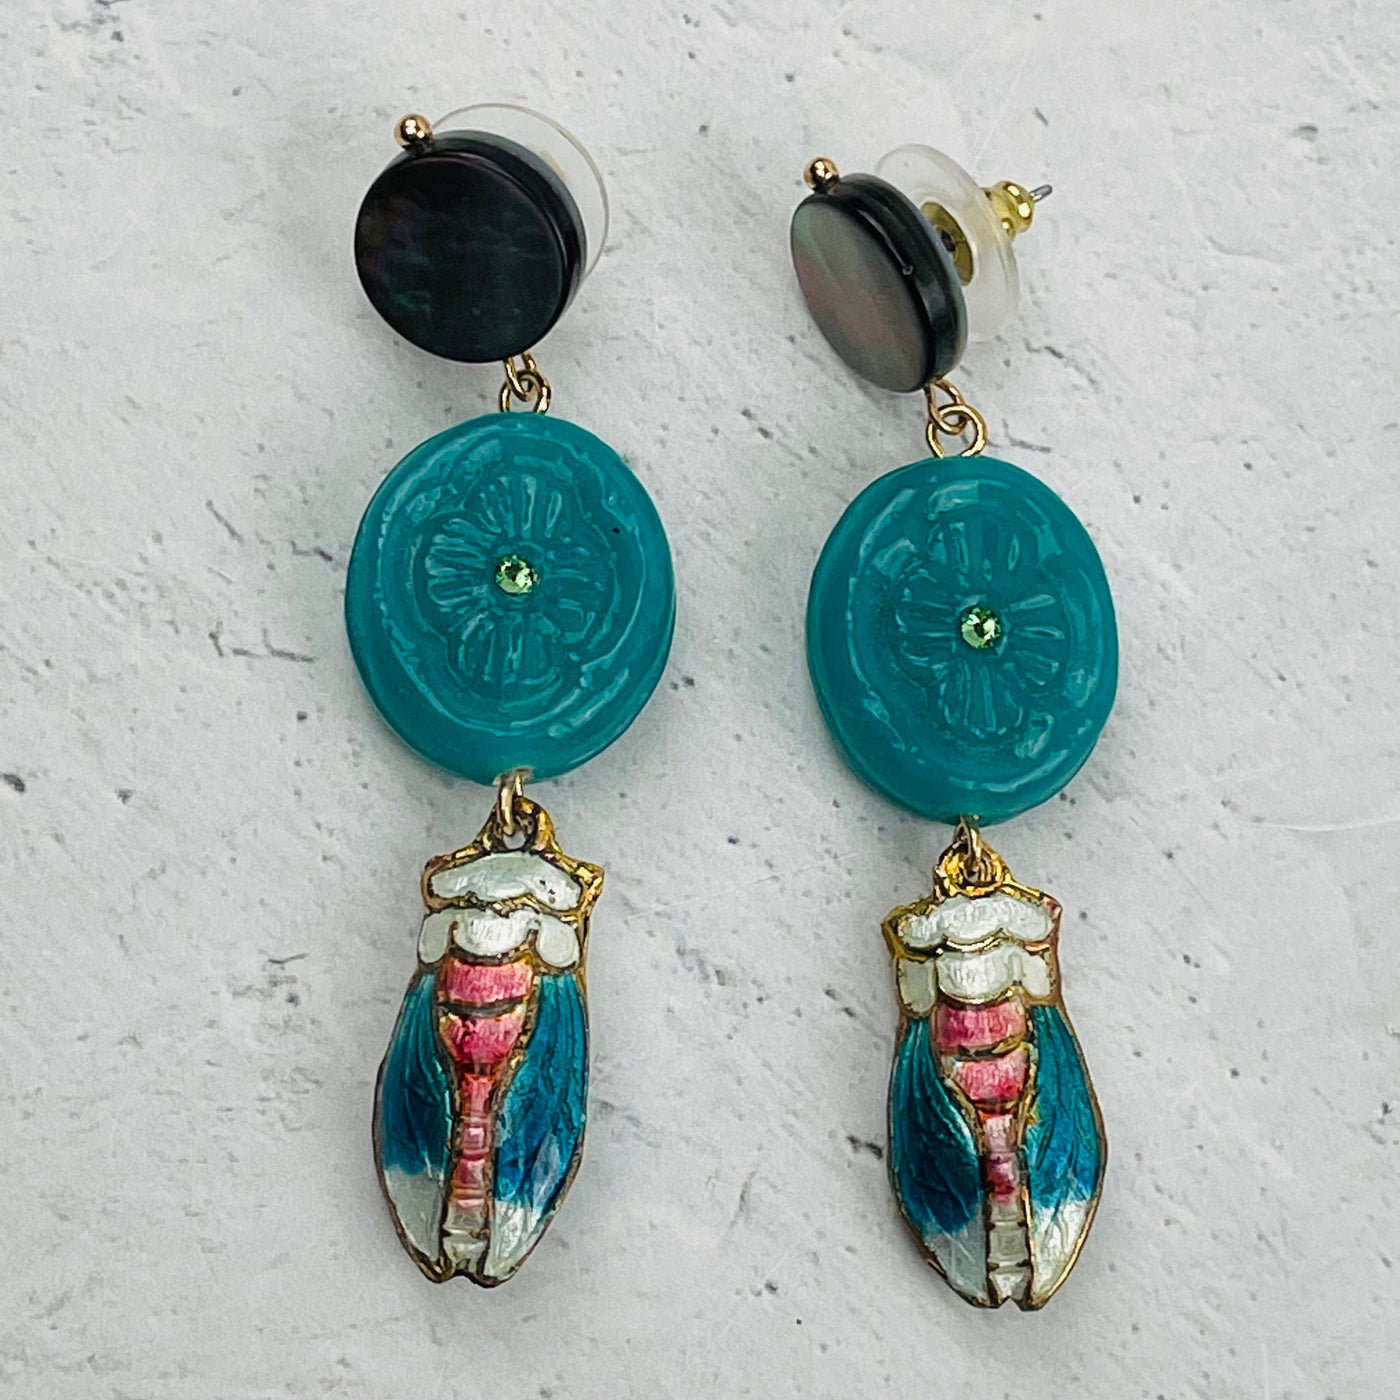 earrings that come paired with the necklace 